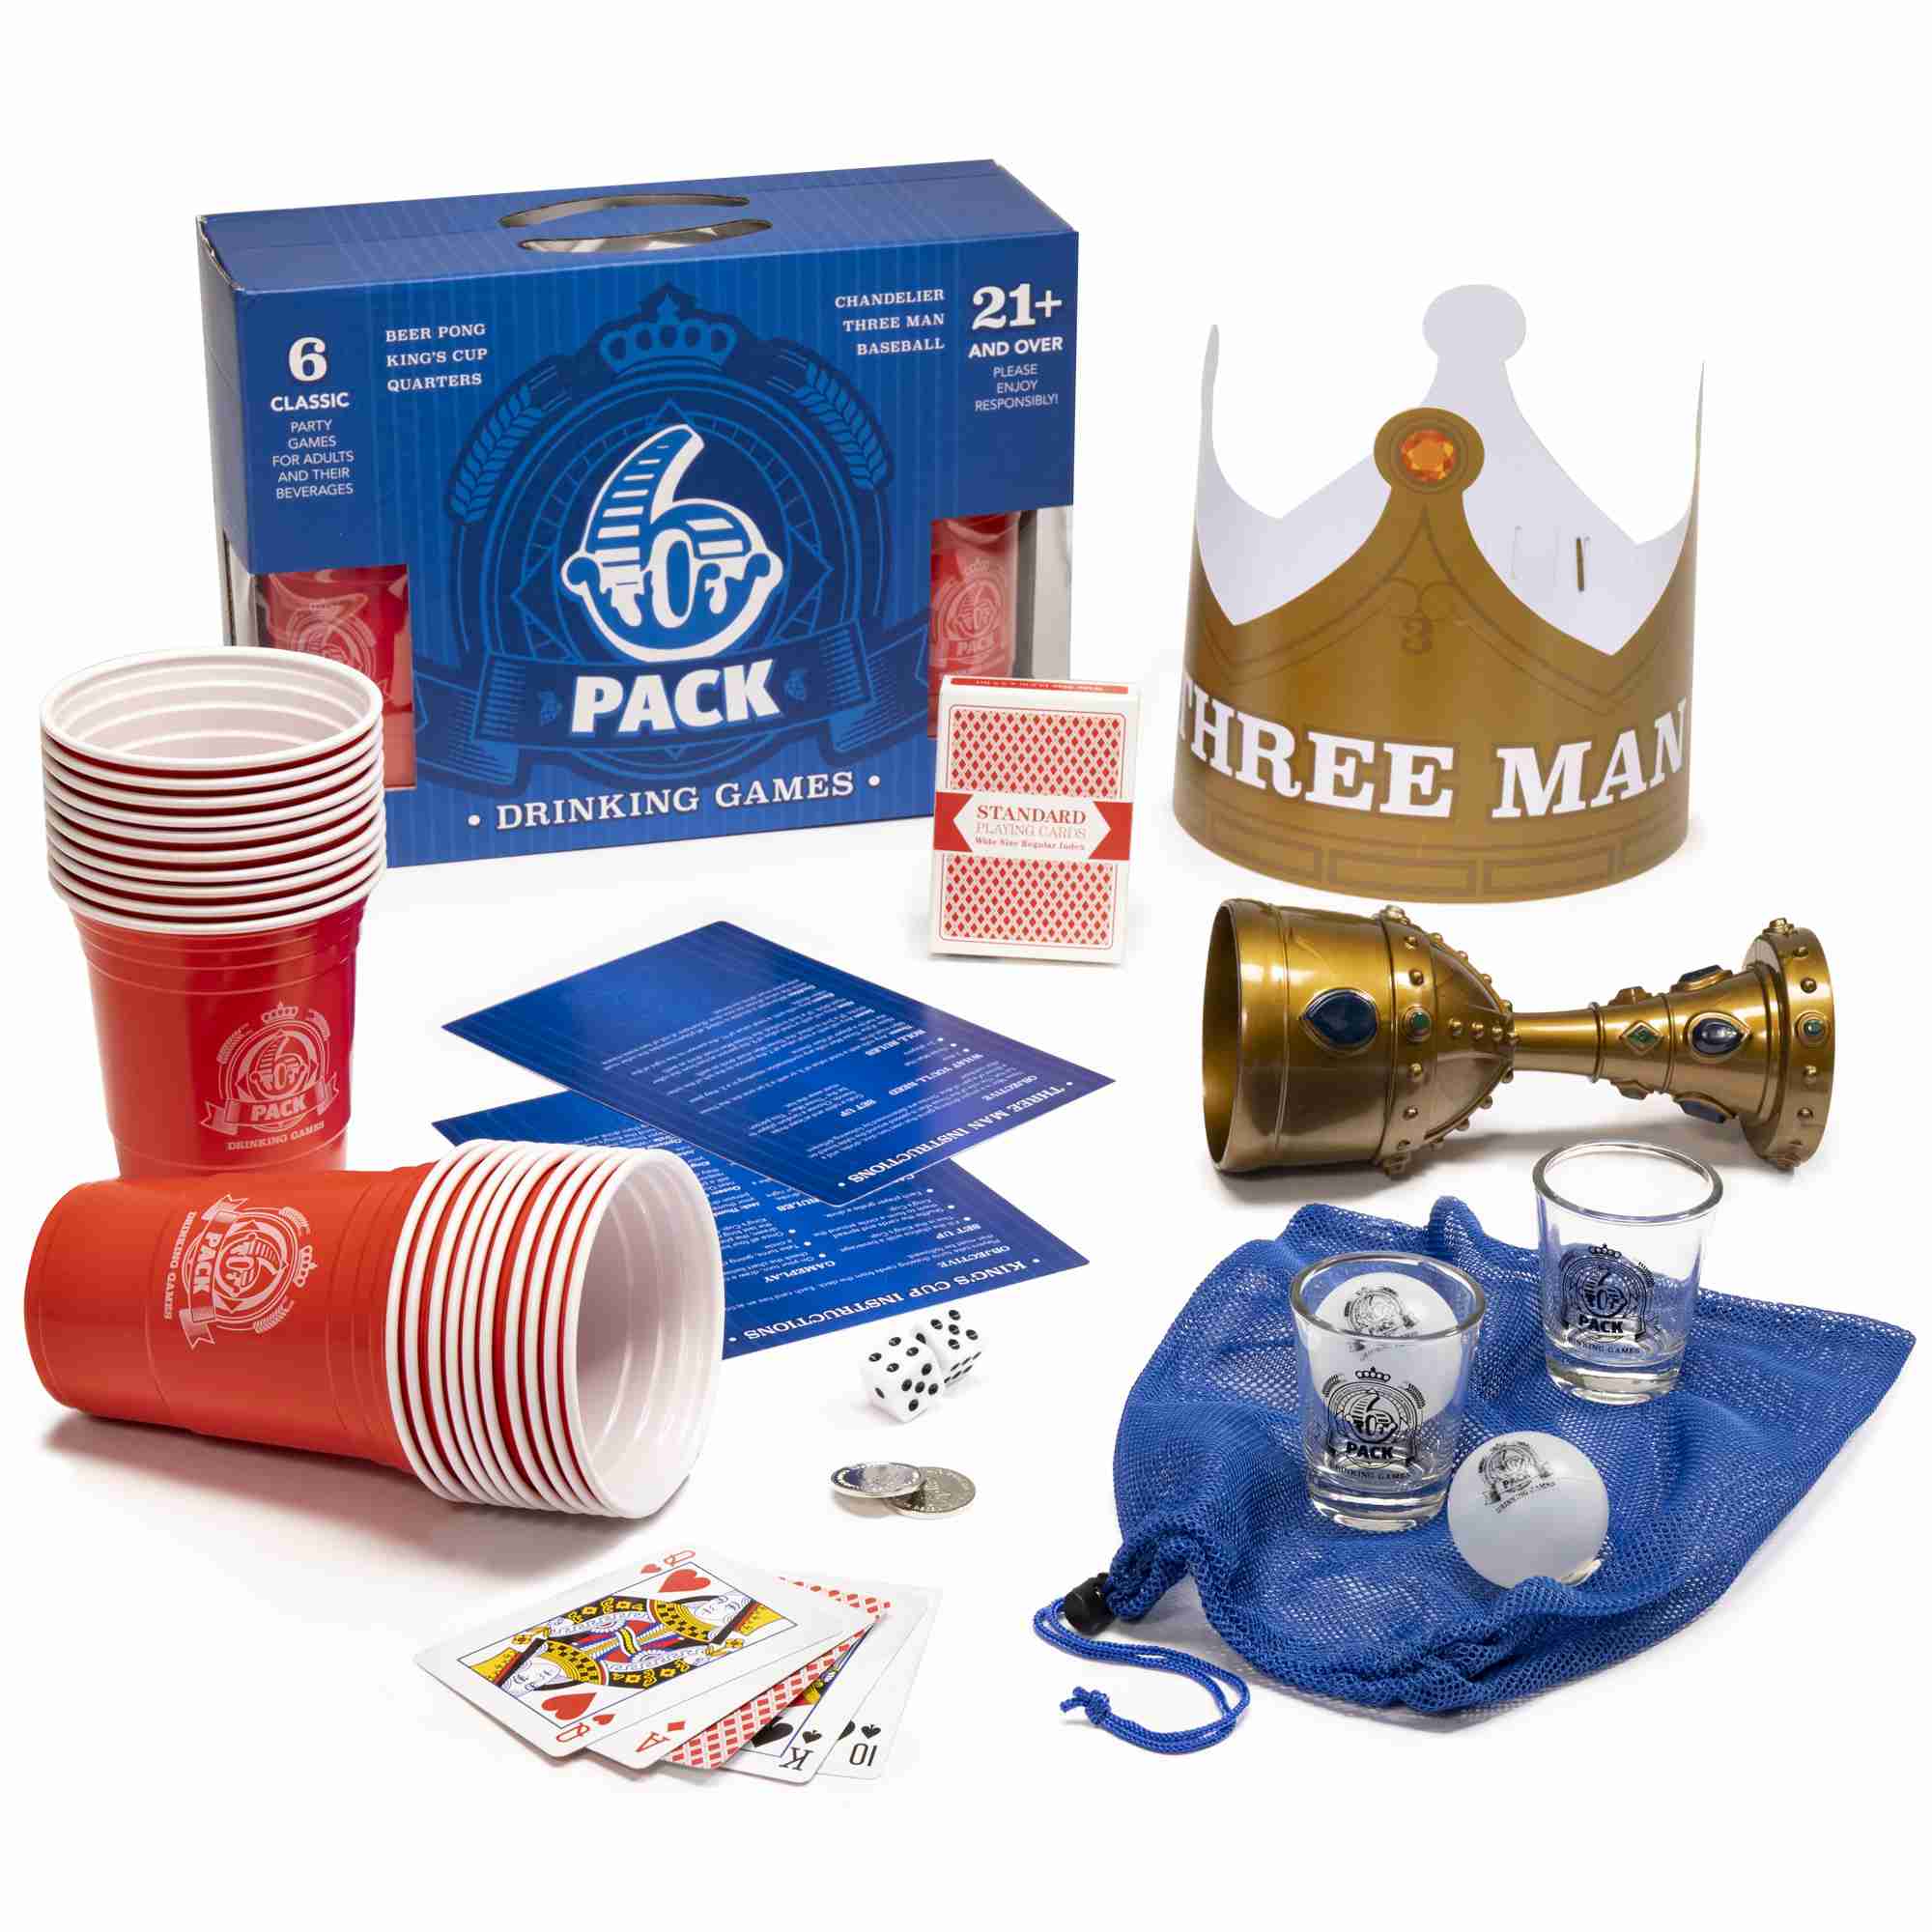 Drinking-Games with cash back rebate